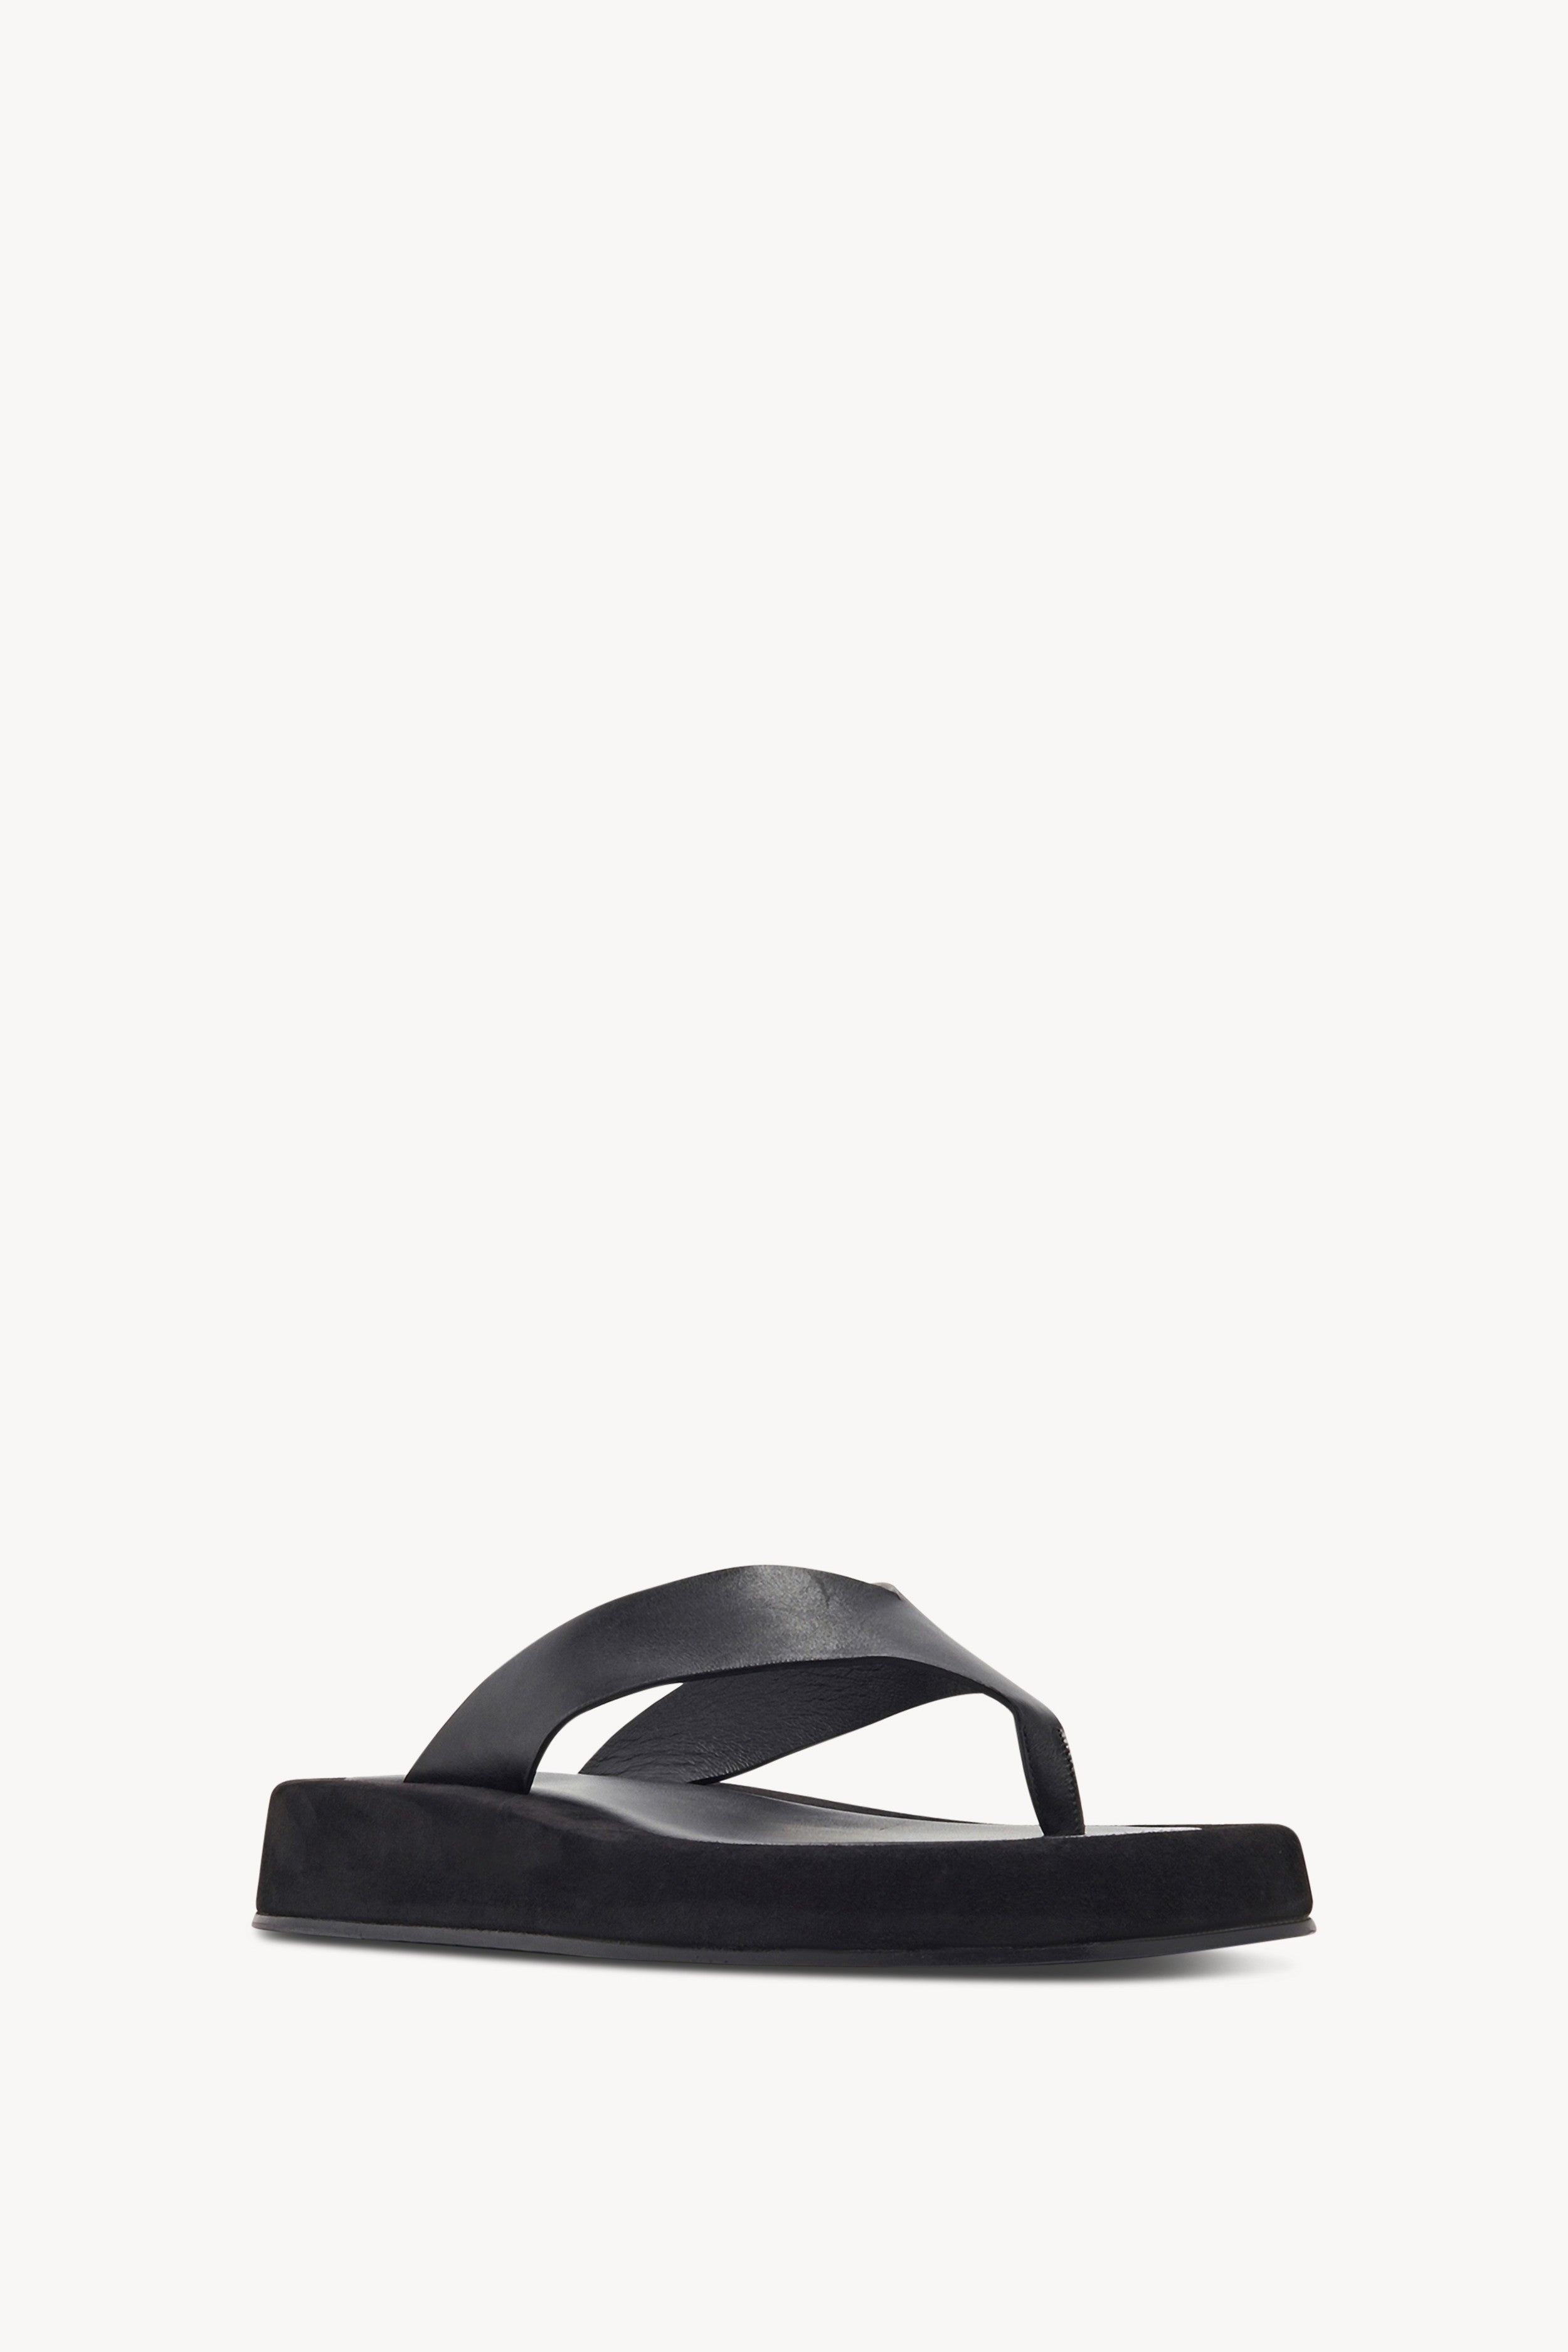 Ginza Sandal in Suede - 2